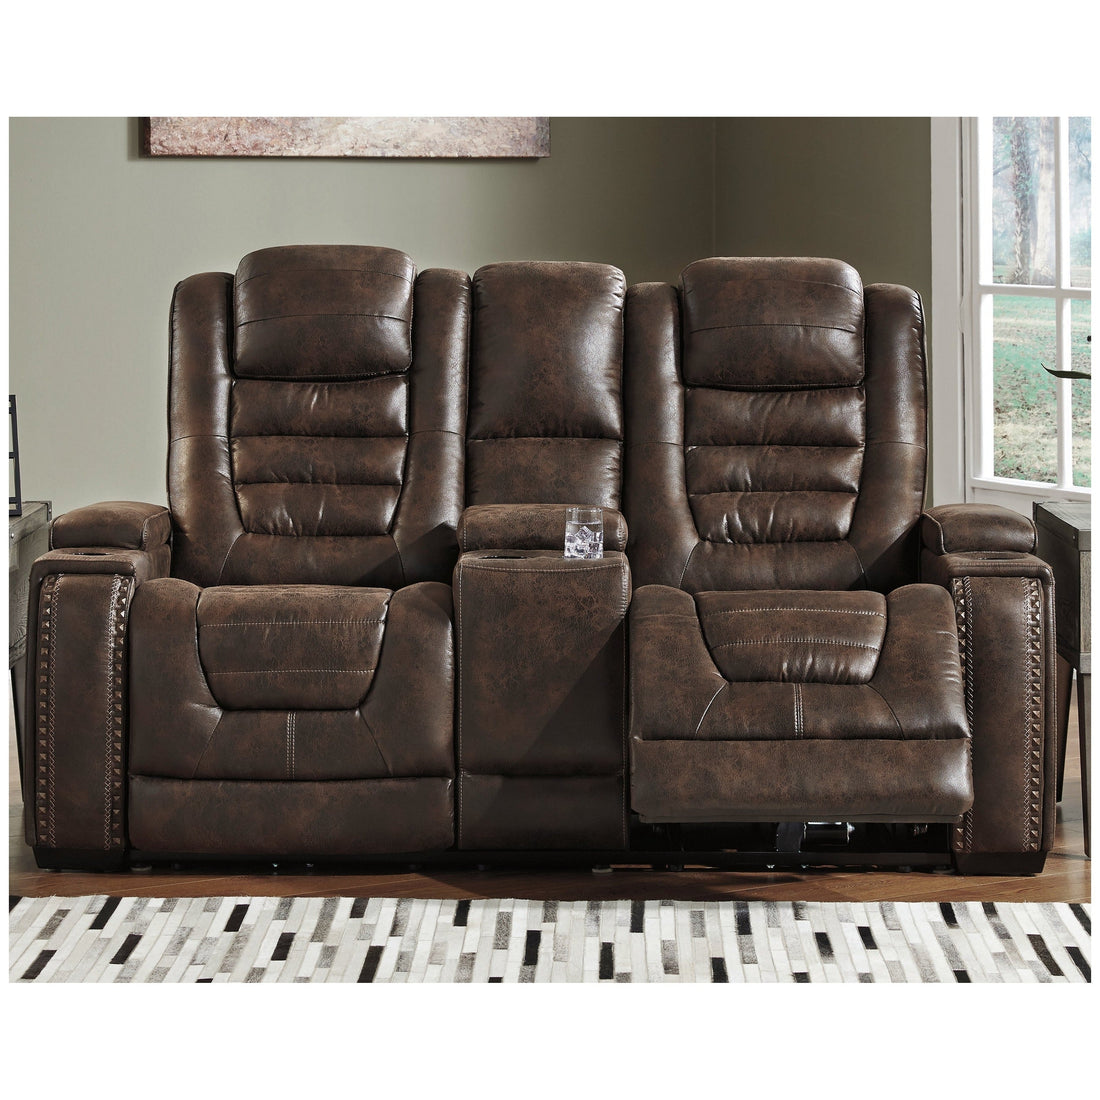 Game Zone Power Reclining Loveseat with Console Ash-3850118